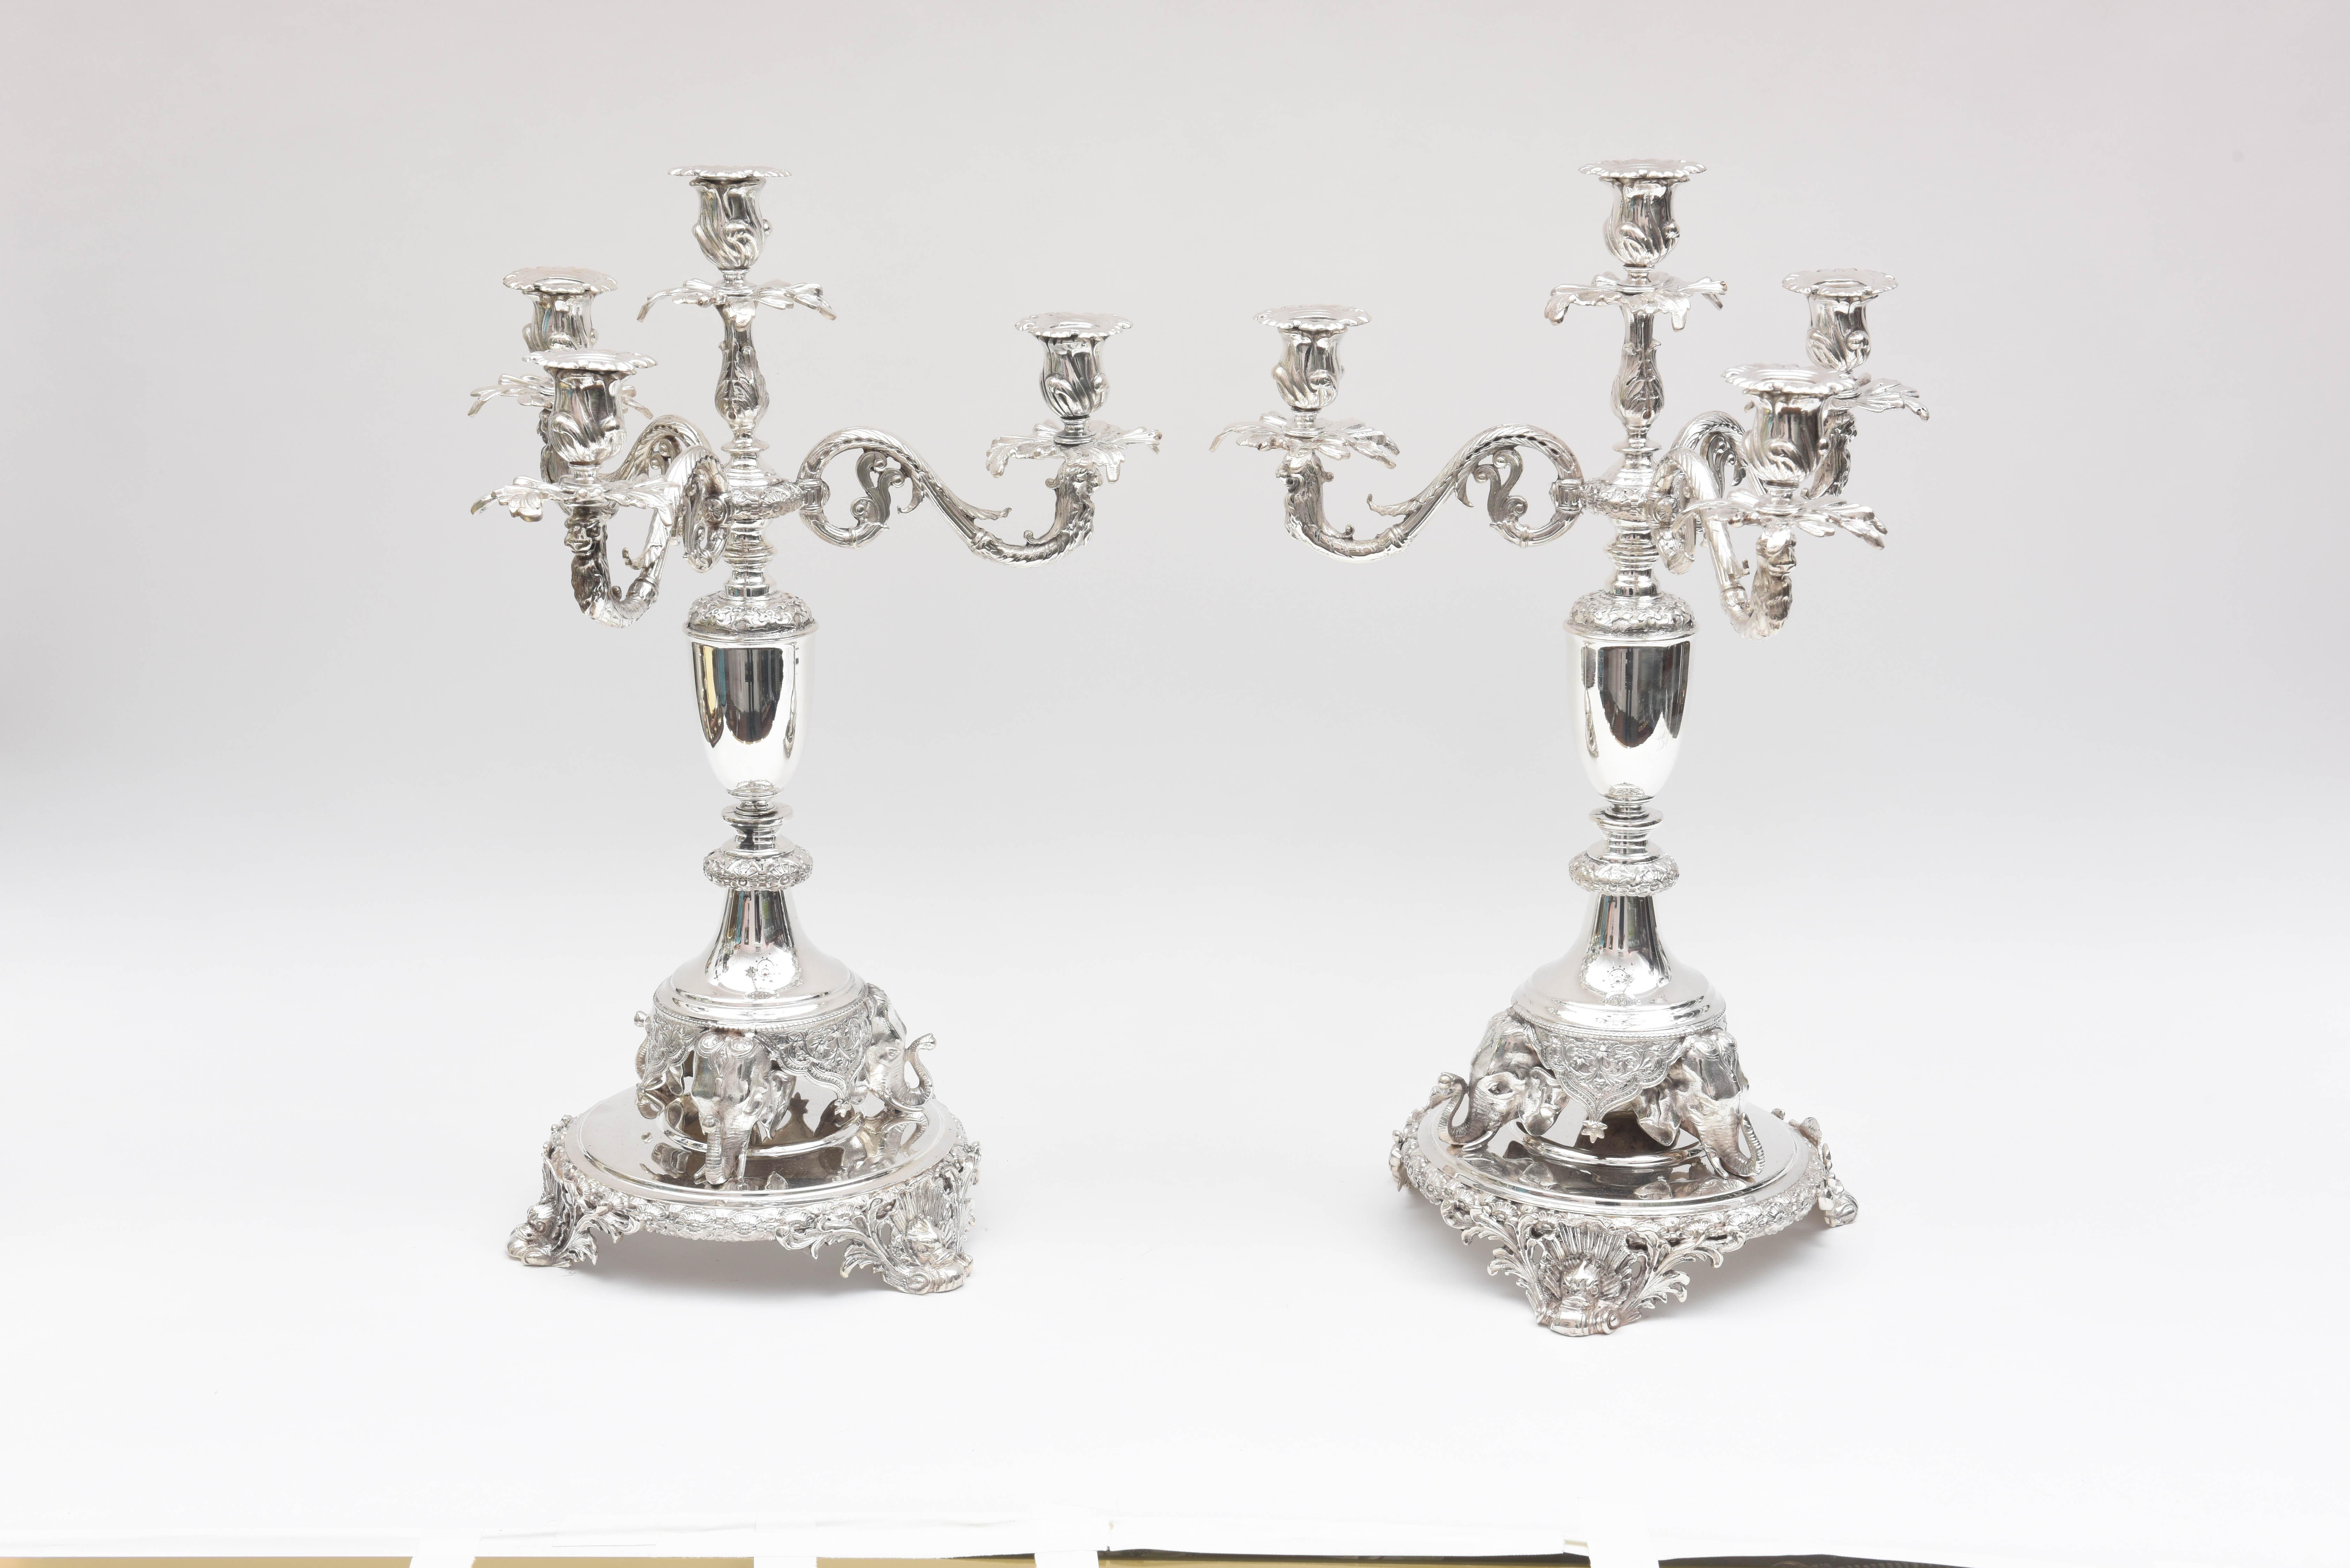 A tall and well chased set of 2 elegant candelabra with figural tripartite elephant feet. They are raised on scrolled platform bases with dolphin and shell flourishes to their feet. They are in fine vintage condition and are show stopping stunning.